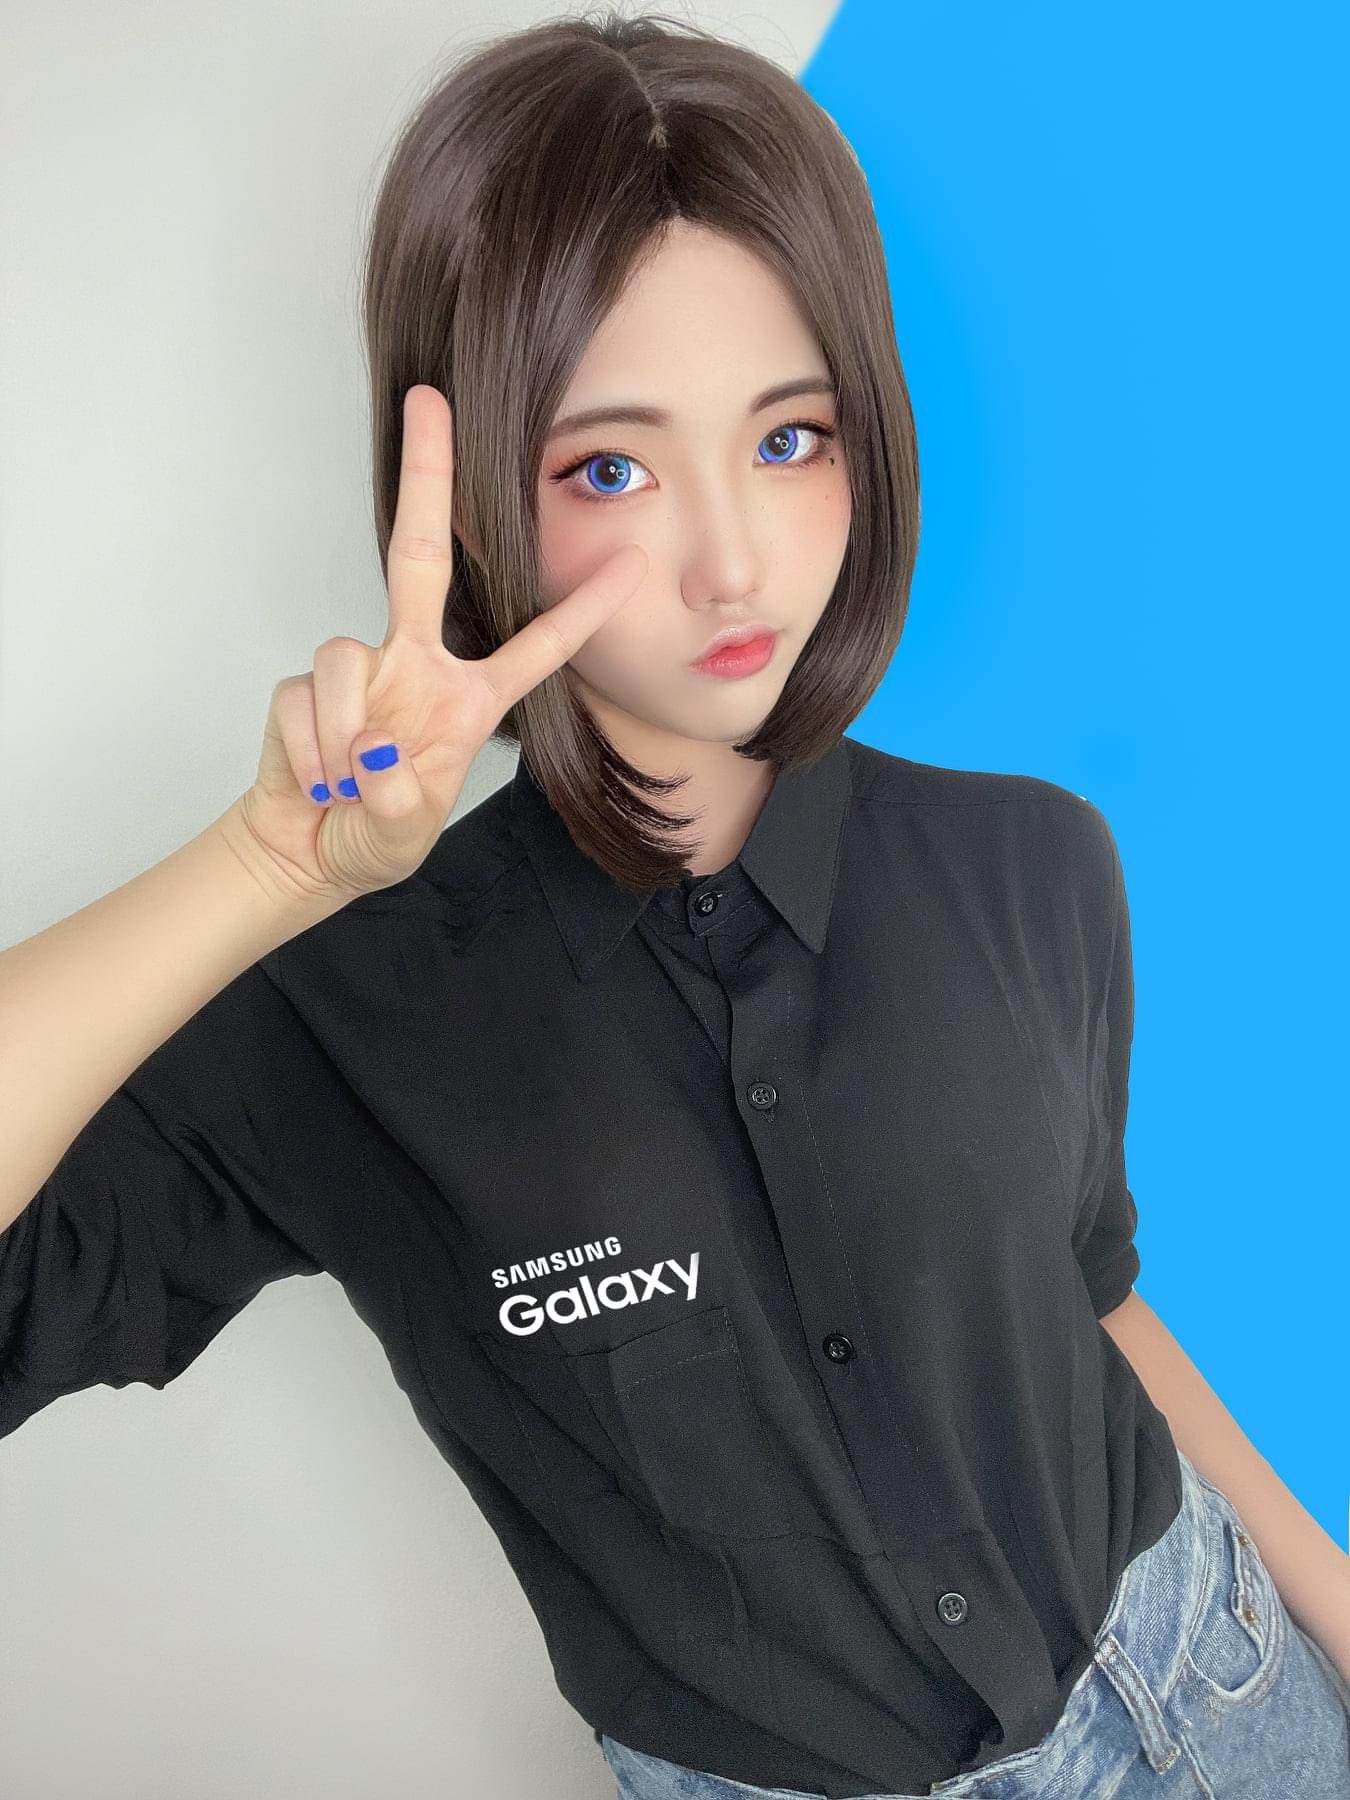 Samsung's Alleged New Virtual Assistant is Inspiring Tons of Cosplay